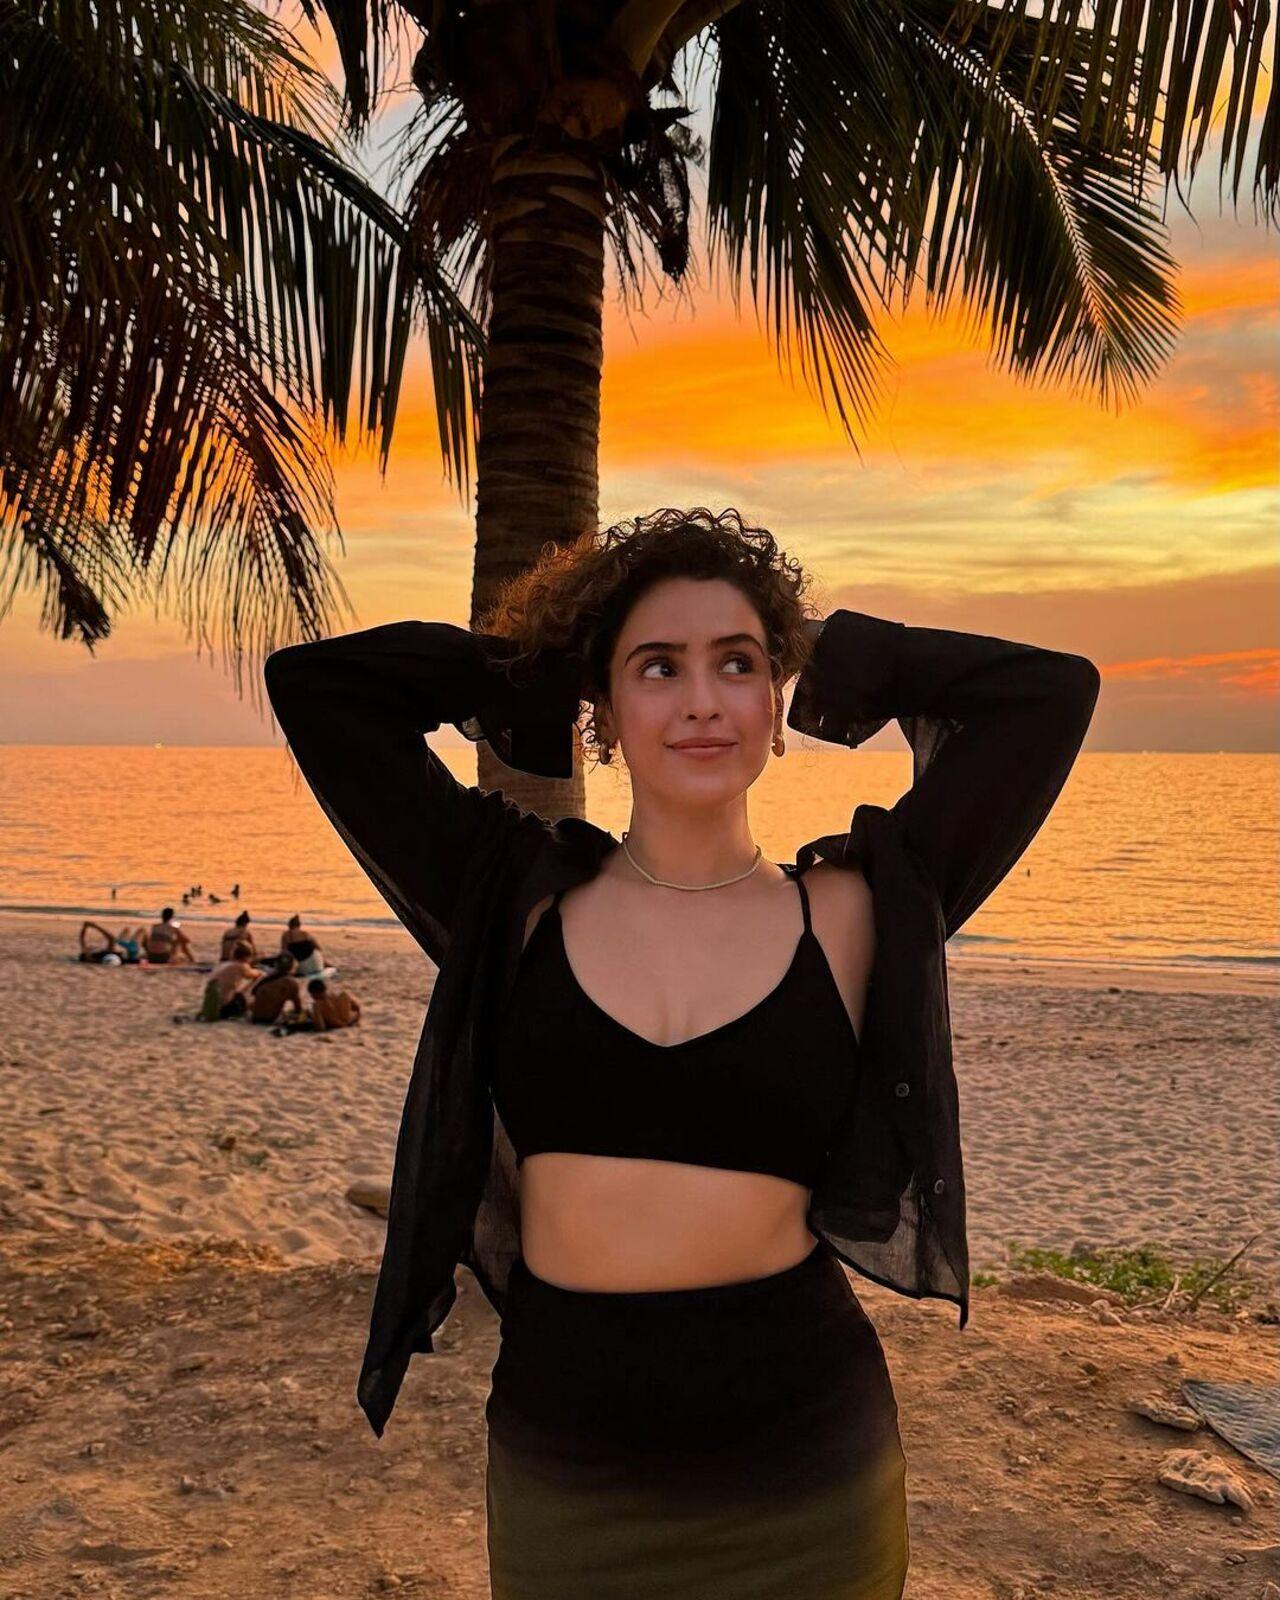 In her previous set of pictures, Sanya posed in a black outfit with a picturesque view of the sunset. 